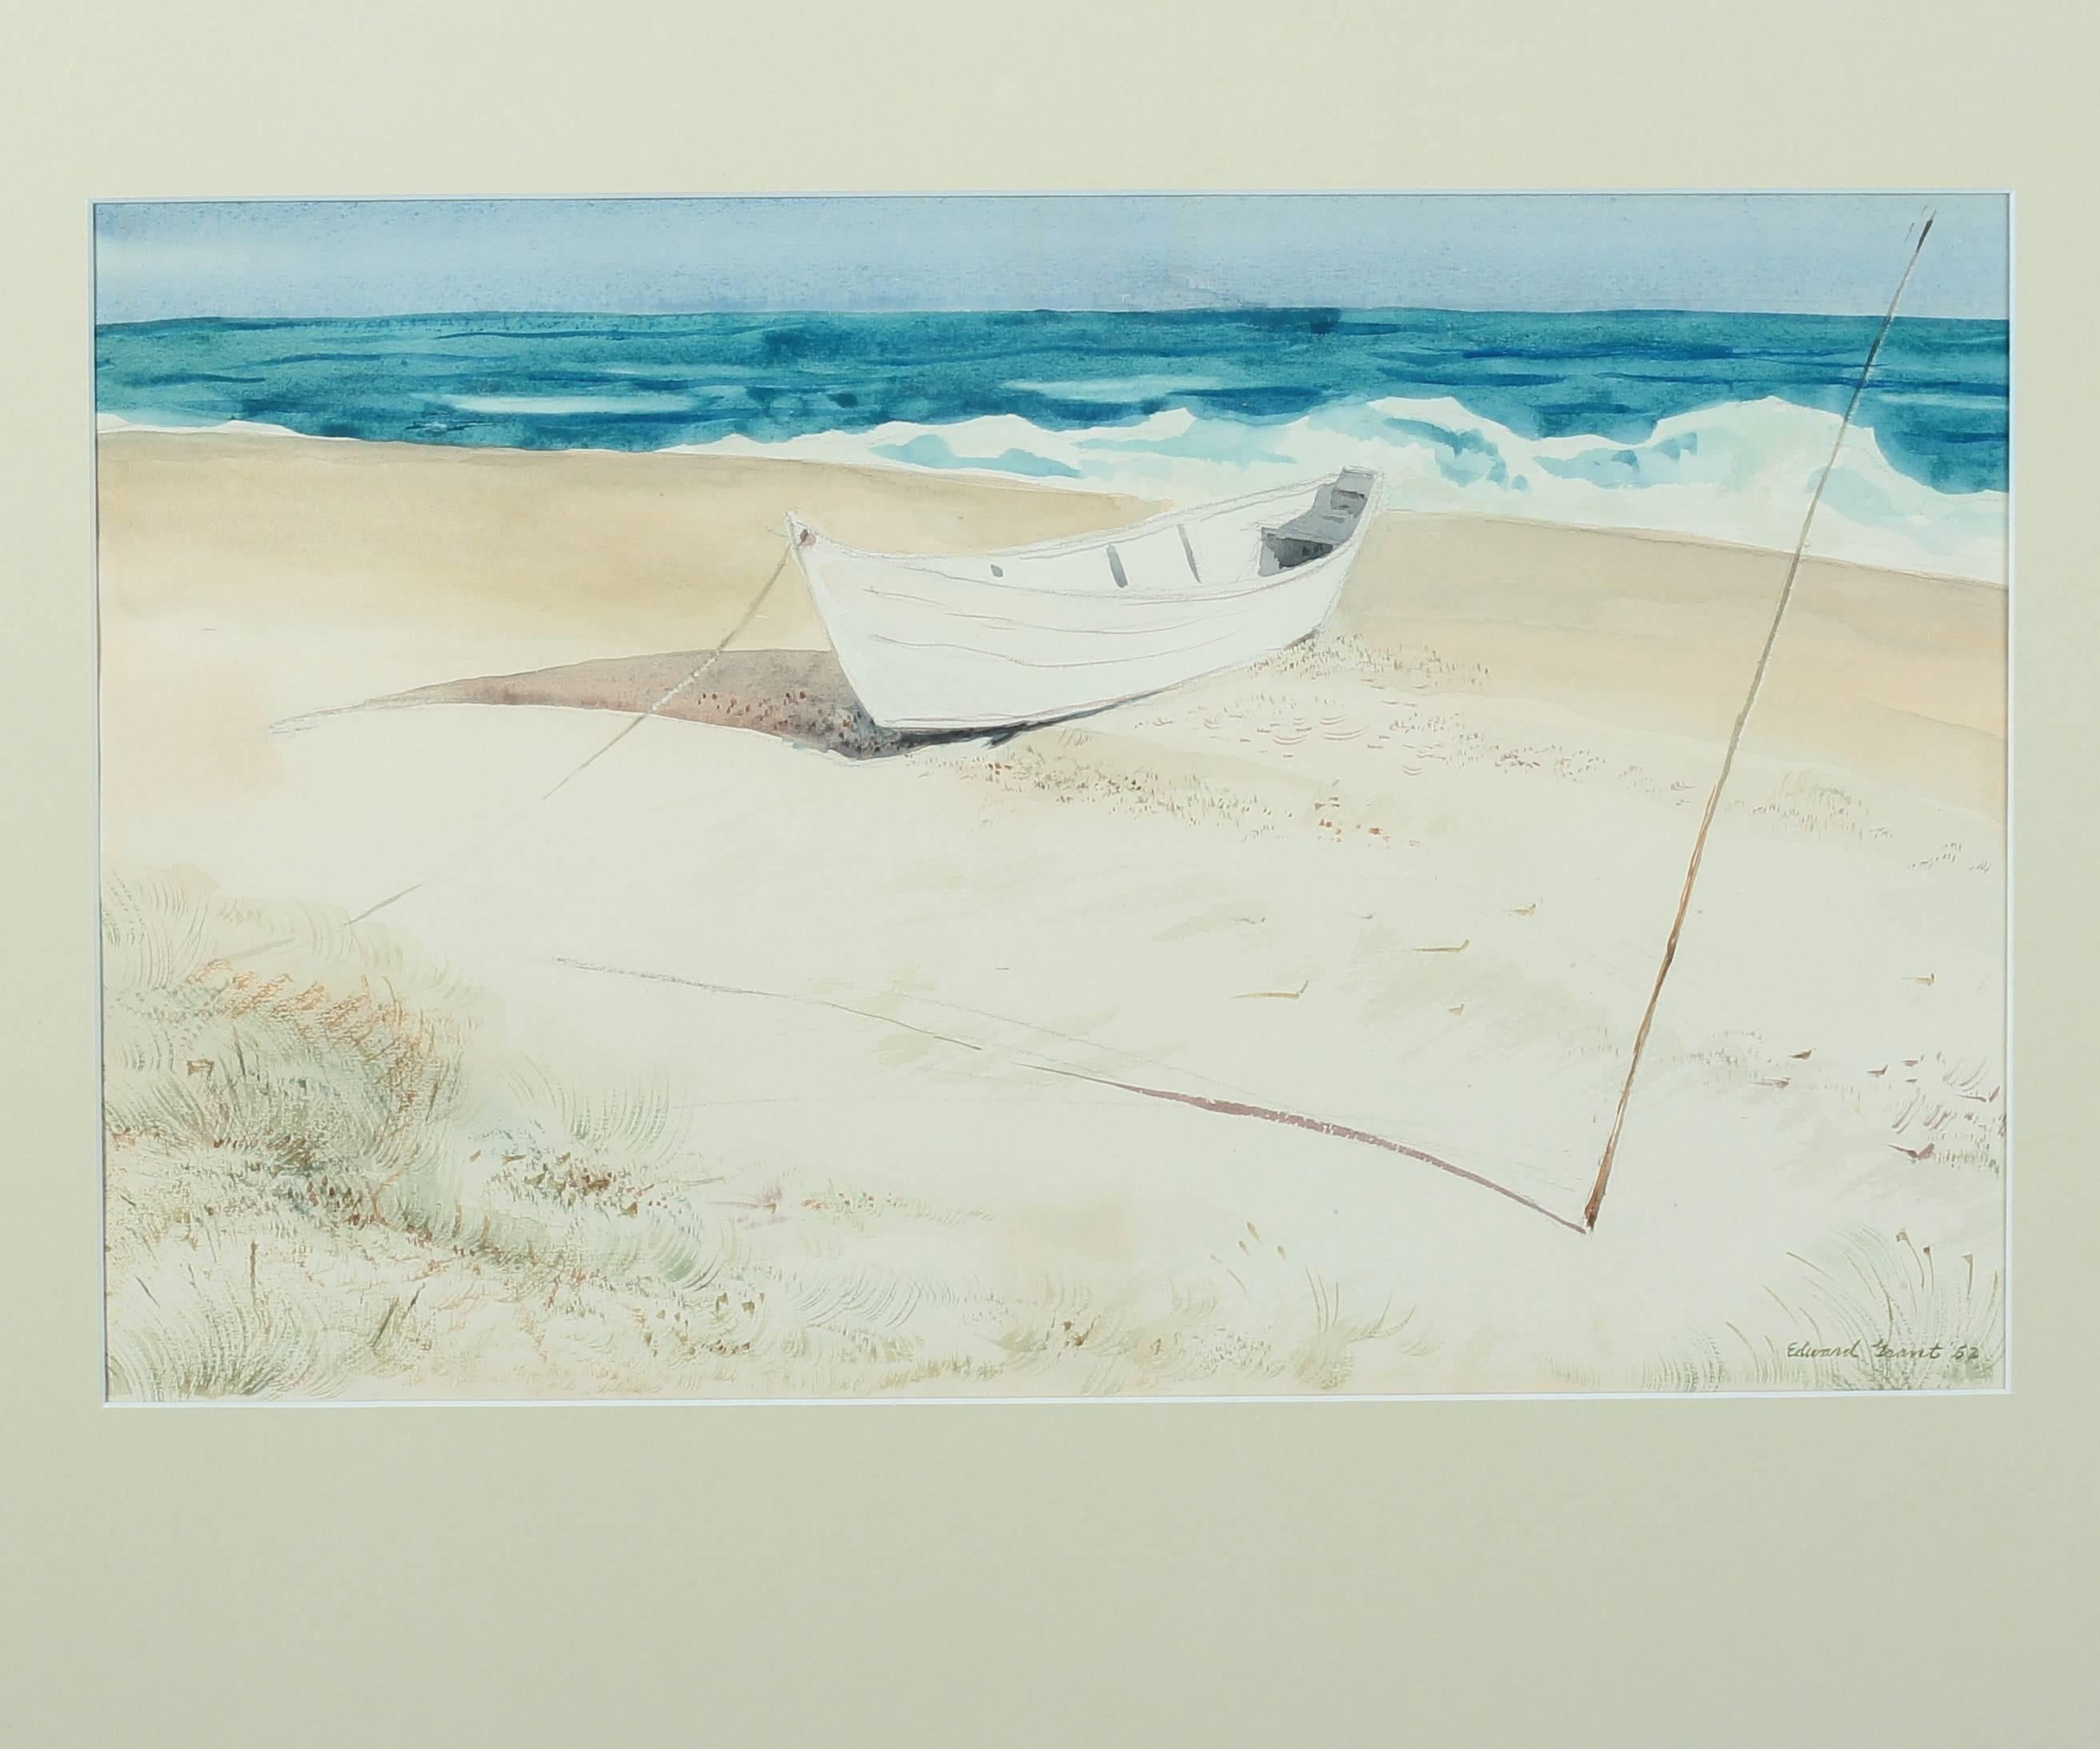 A watercolor painting of Cape Henlopen beach by artist Edward Grant. An American piece dating to 1952. The sight size measures 10.25 inches high by 16 inches wide and the frame size measures 20.25 inches high by 26.25 inches wide.